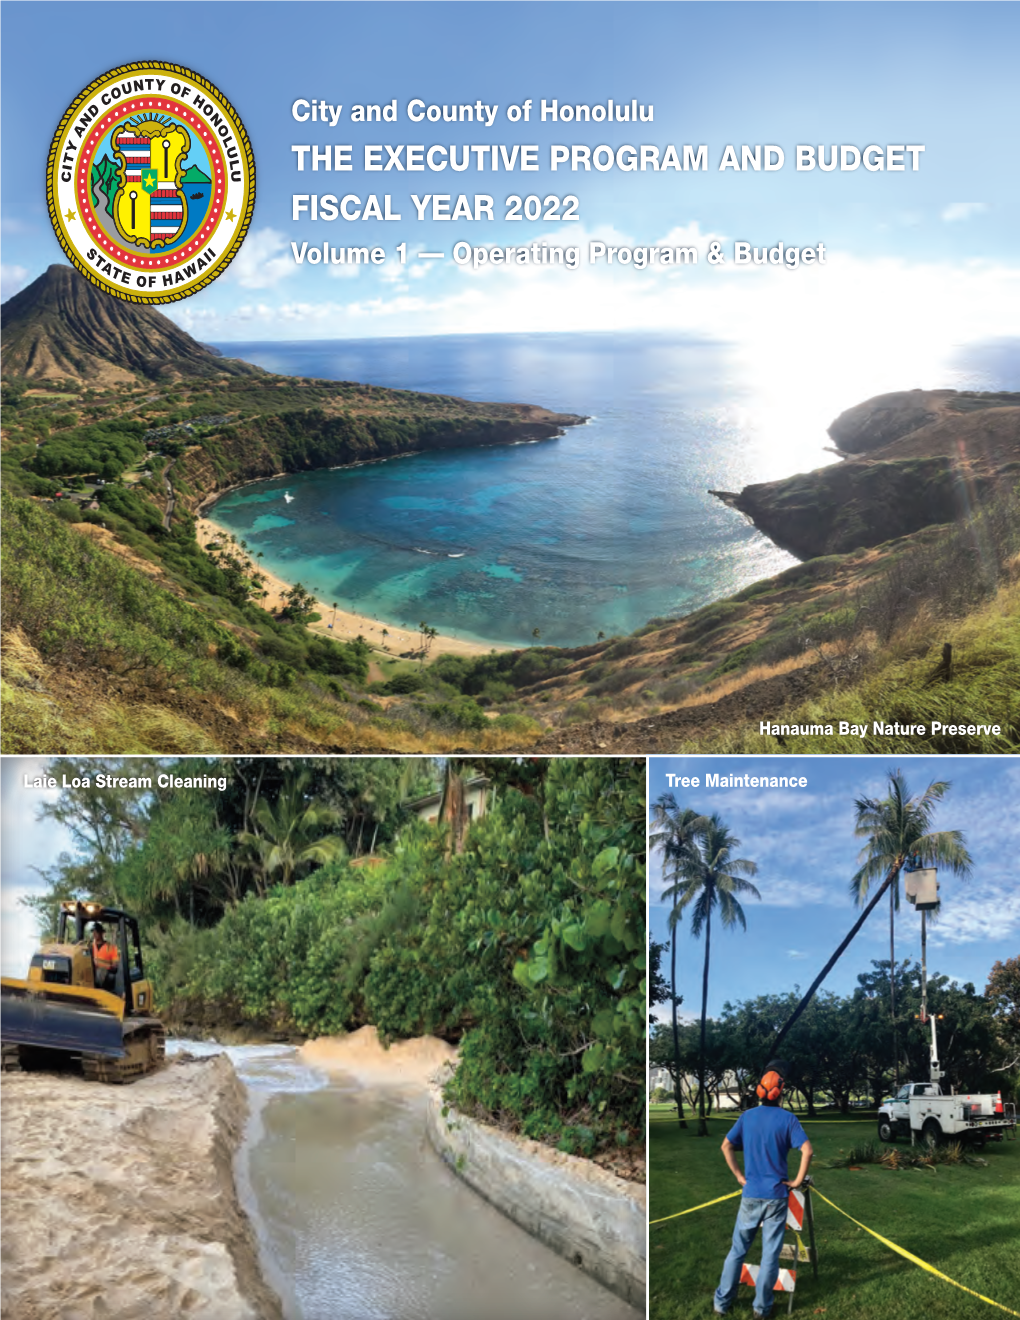 THE EXECUTIVE PROGRAM and BUDGET FISCAL YEAR 2022 Volume 1 — Operating Program & Budget